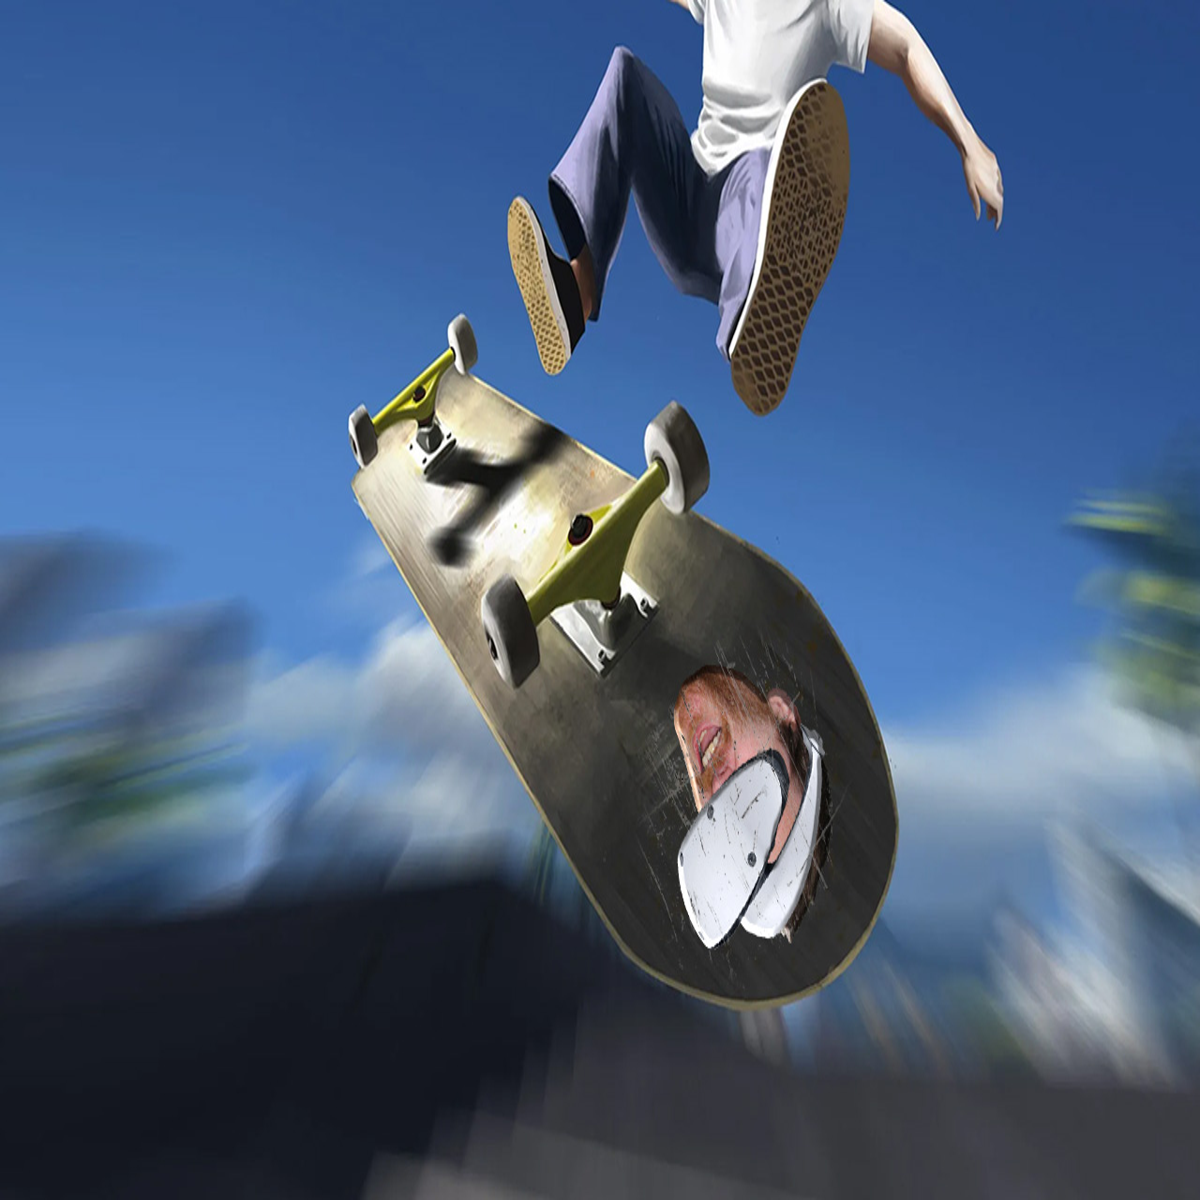 WE TRIED TO REVIEW EVERY SKATEBOARDING GAME ON PLAYSTATION